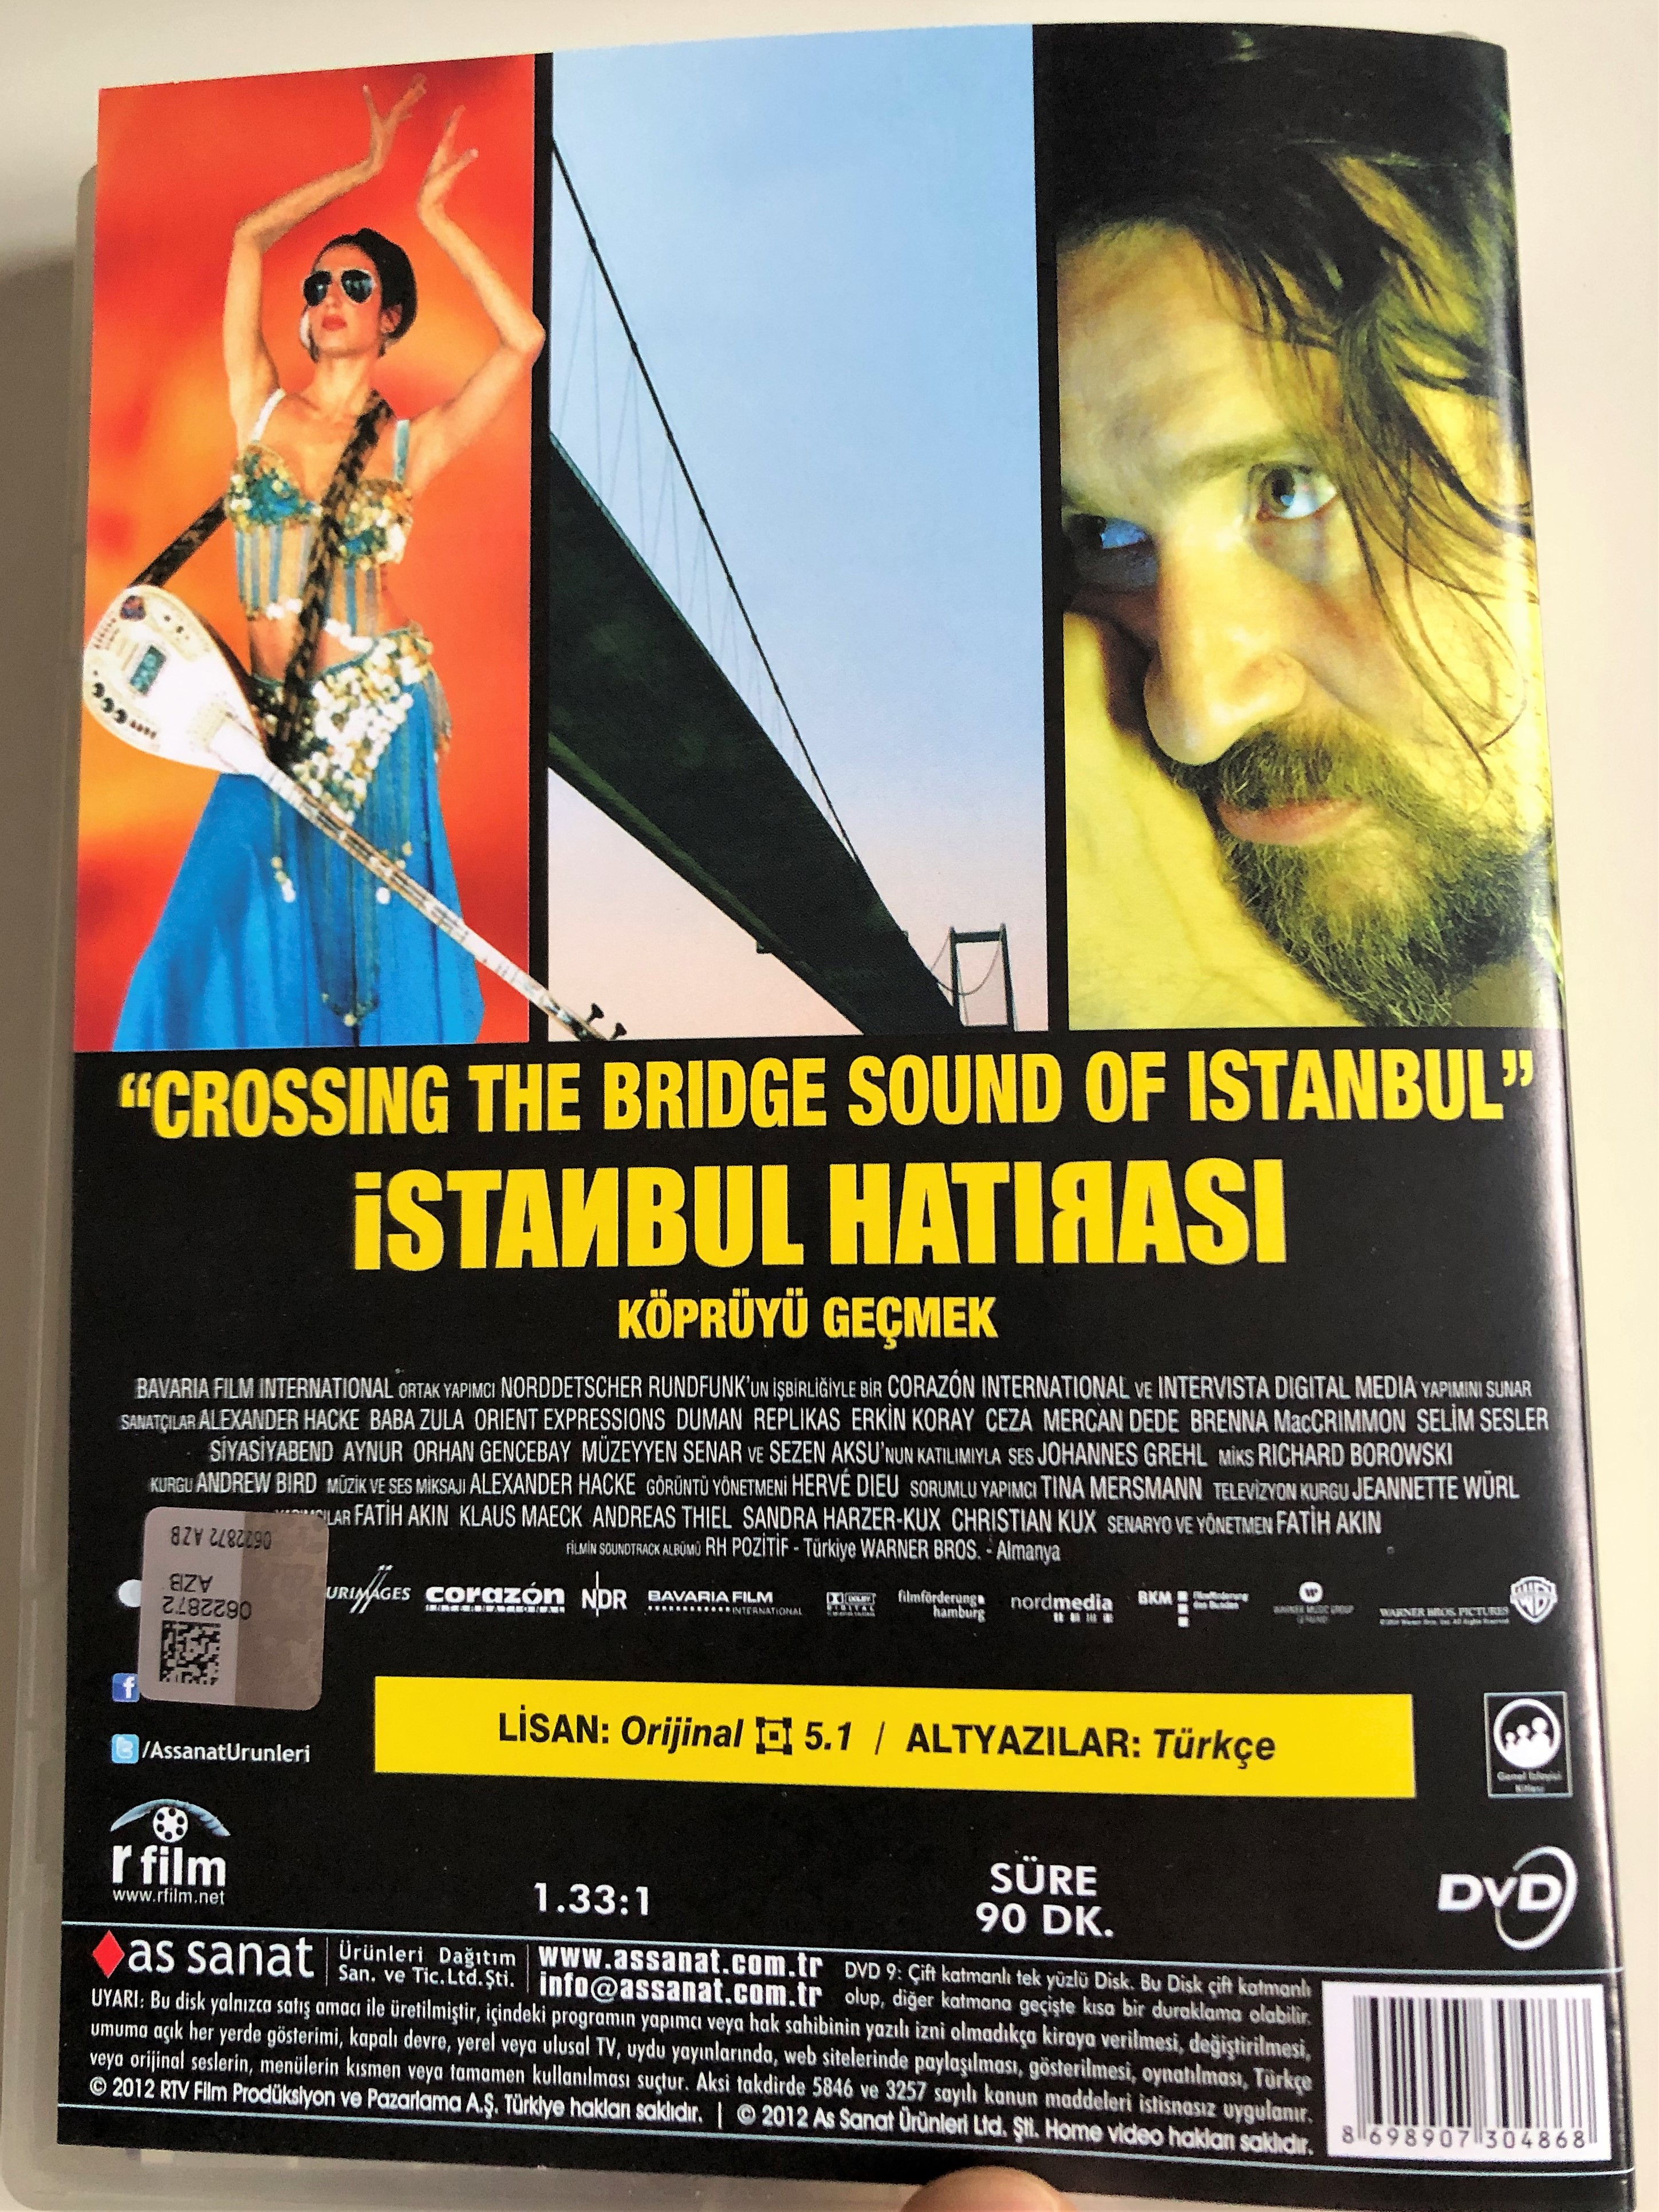 -stanbul-hat-ras-dvd-2005-crossing-the-bridge-sound-of-istanbul-directed-by-fatih-ak-n-documentary-a-journey-through-the-music-scene-in-modern-istanbul-2-.jpg